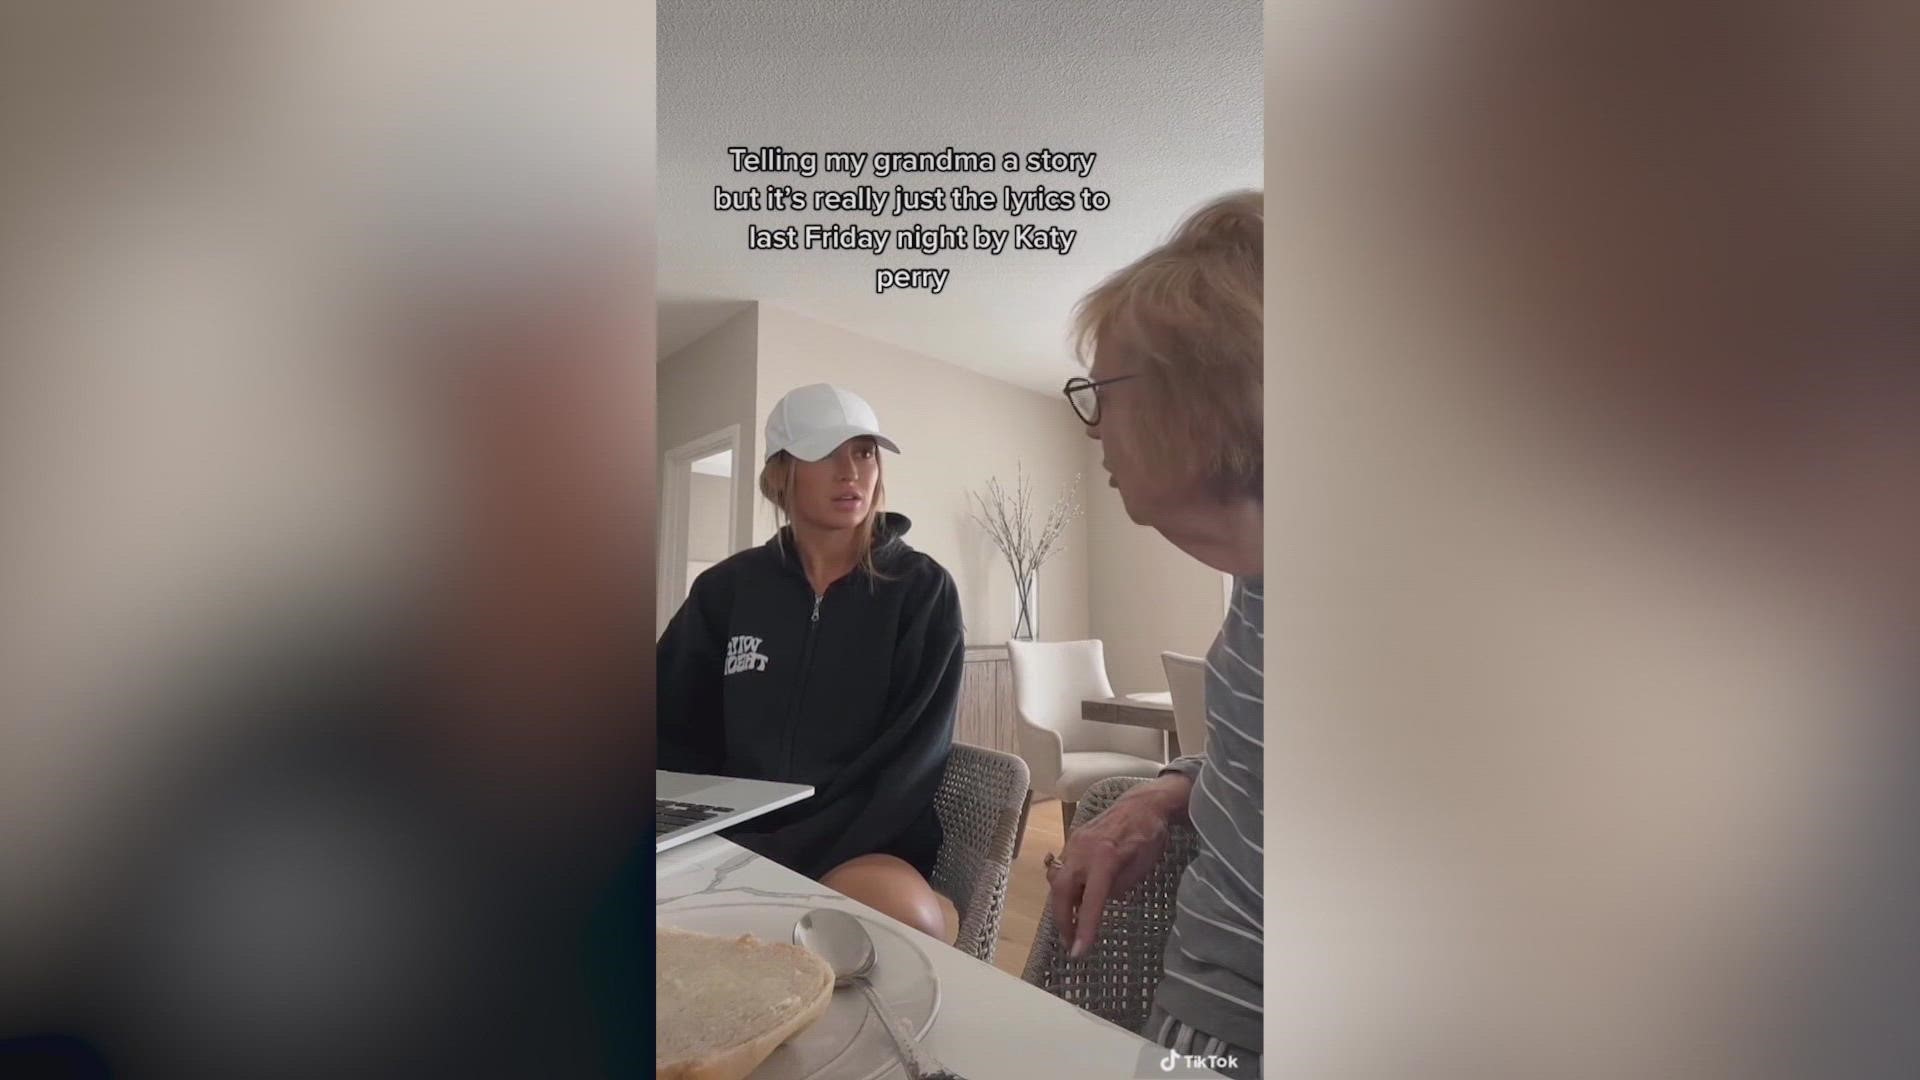 The granddaughter pretended to tell her grandma a wild story, but was actually speaking the lyrics to Katy Perry's "Last Friday Night."